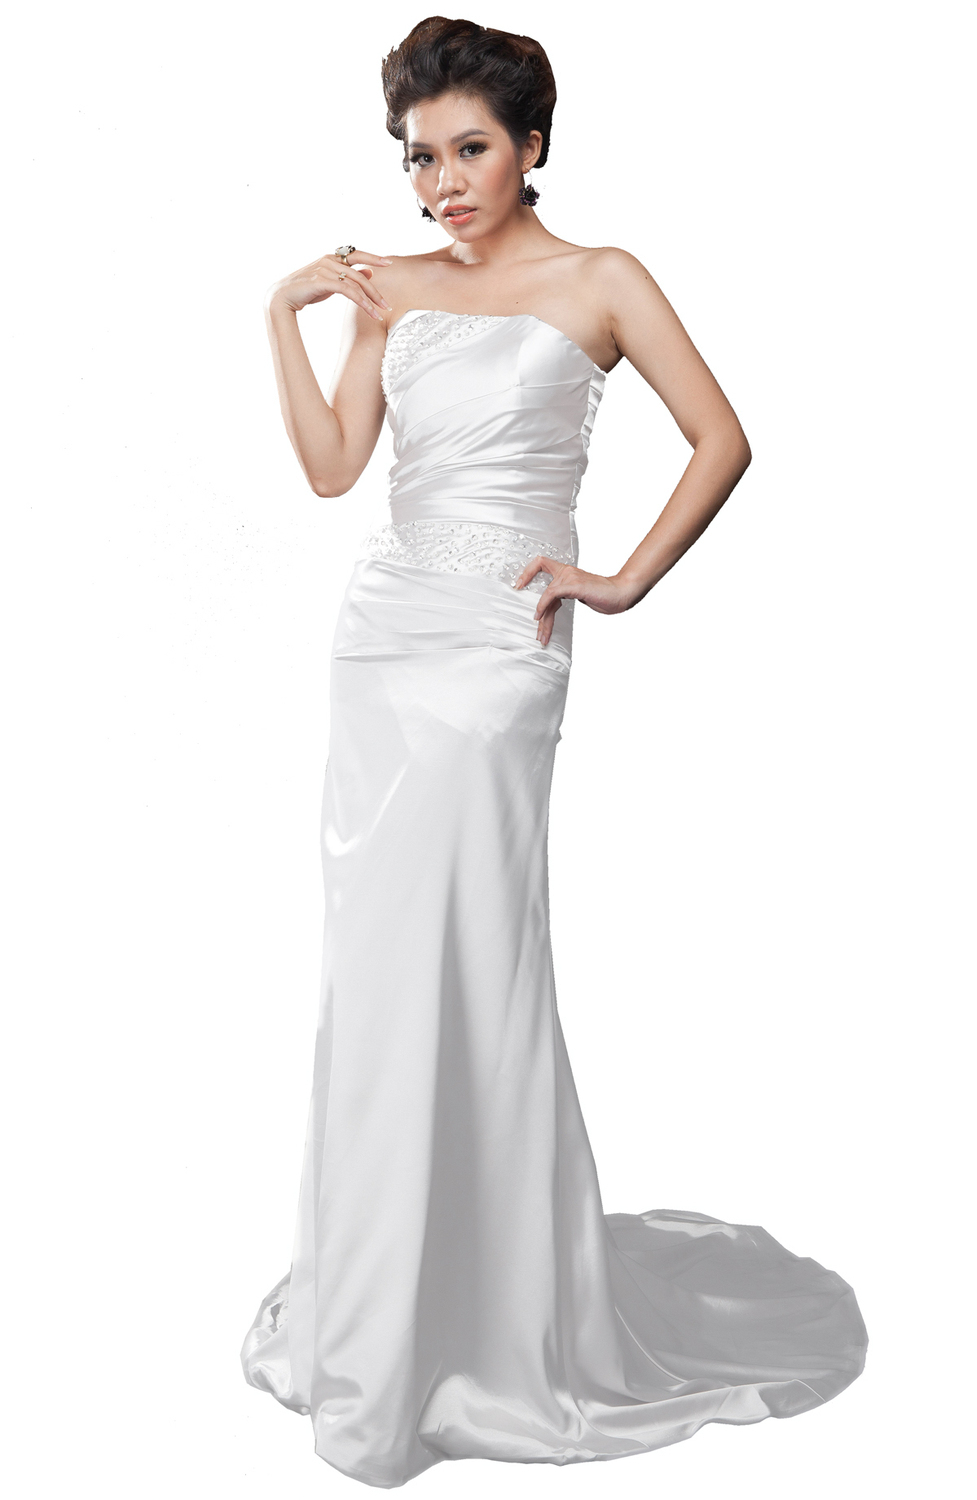 ... Women's Dress Prom Ball Party Wedding Bridal Gowns Ceremony Dress